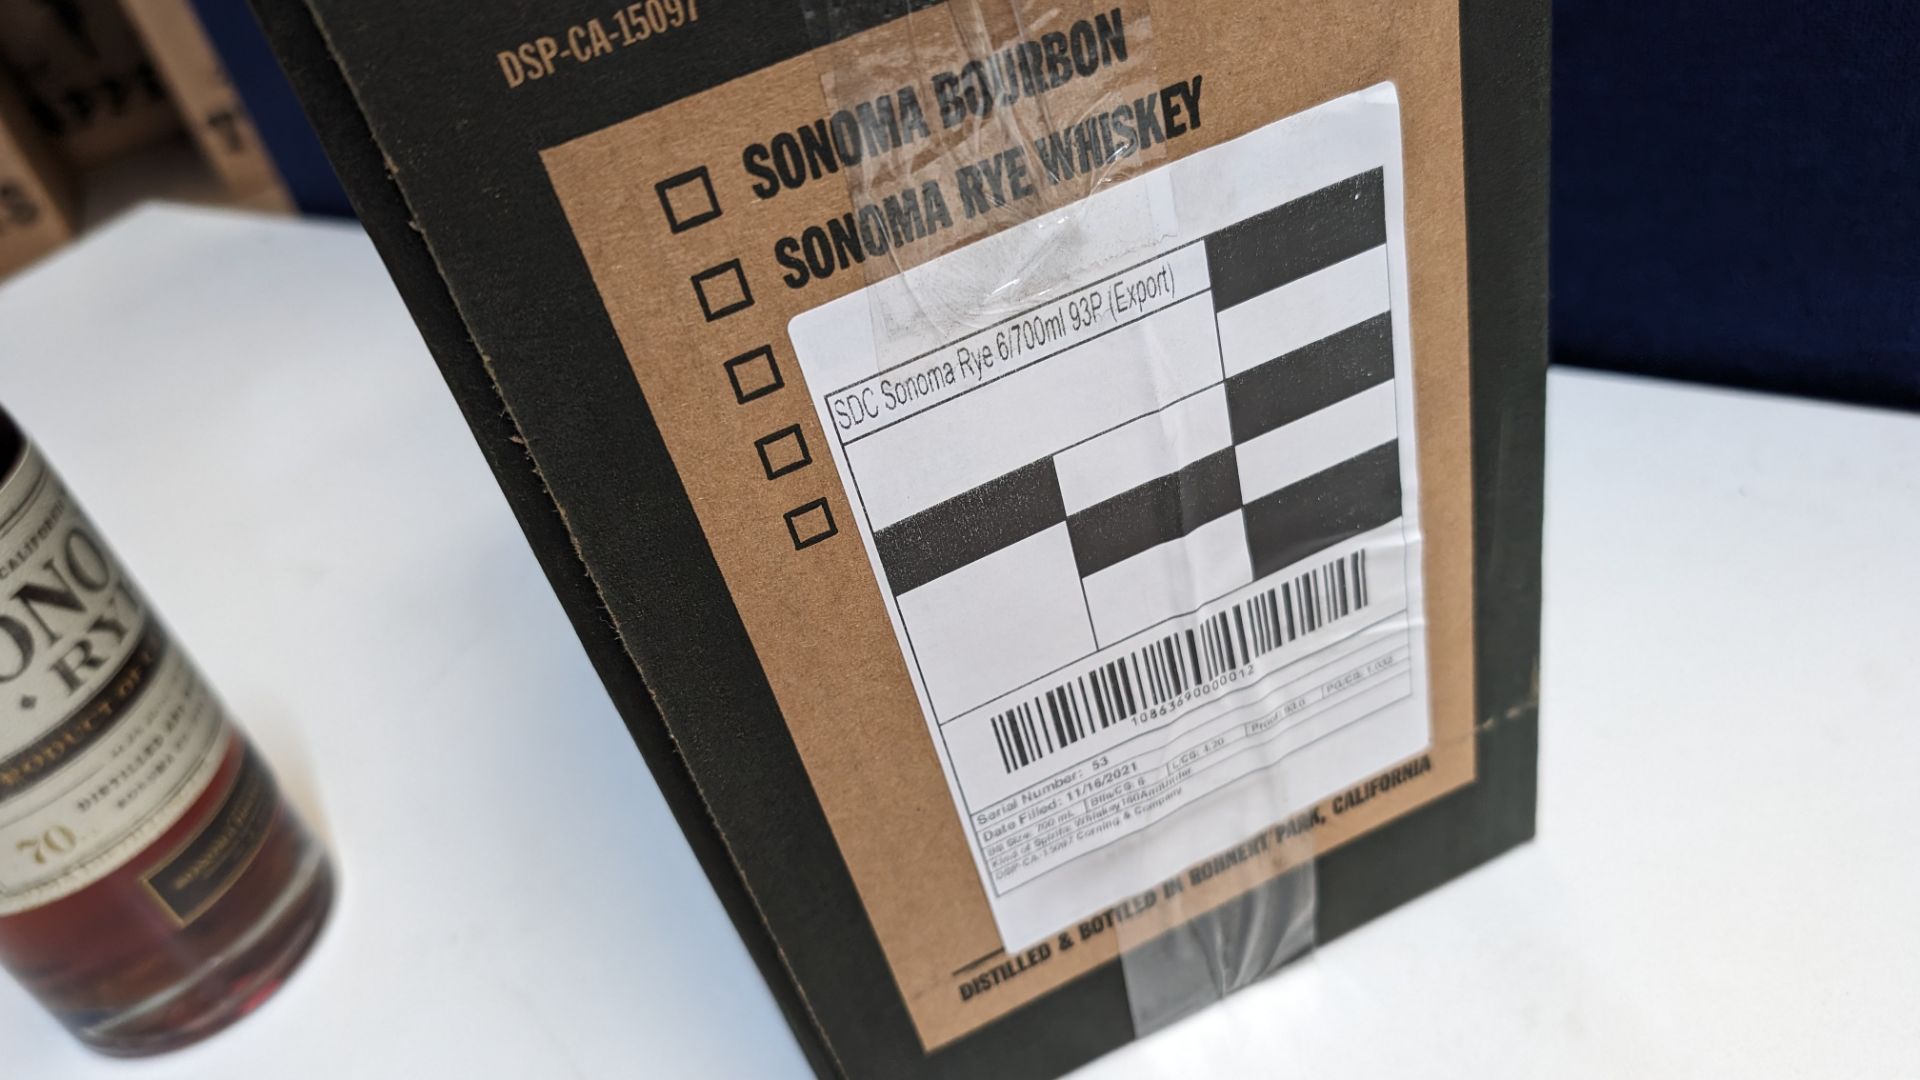 6 off 700ml bottles of Sonoma Rye Whiskey. In Sonoma branded box which includes bottling details on - Image 7 of 8